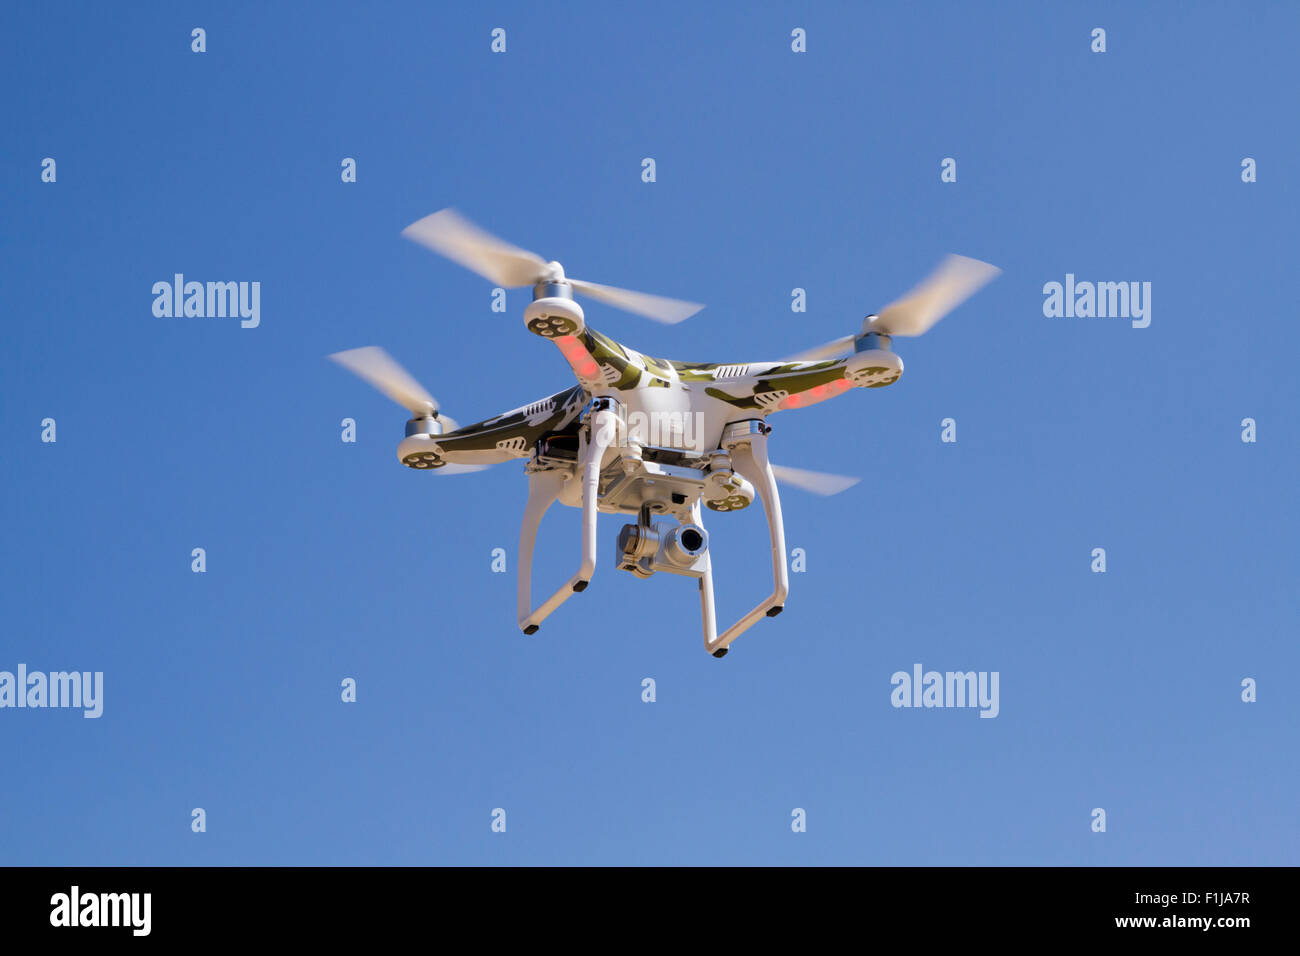 Camouflage Quadcopter hovering with a camera against a blue sky. Stock Photo